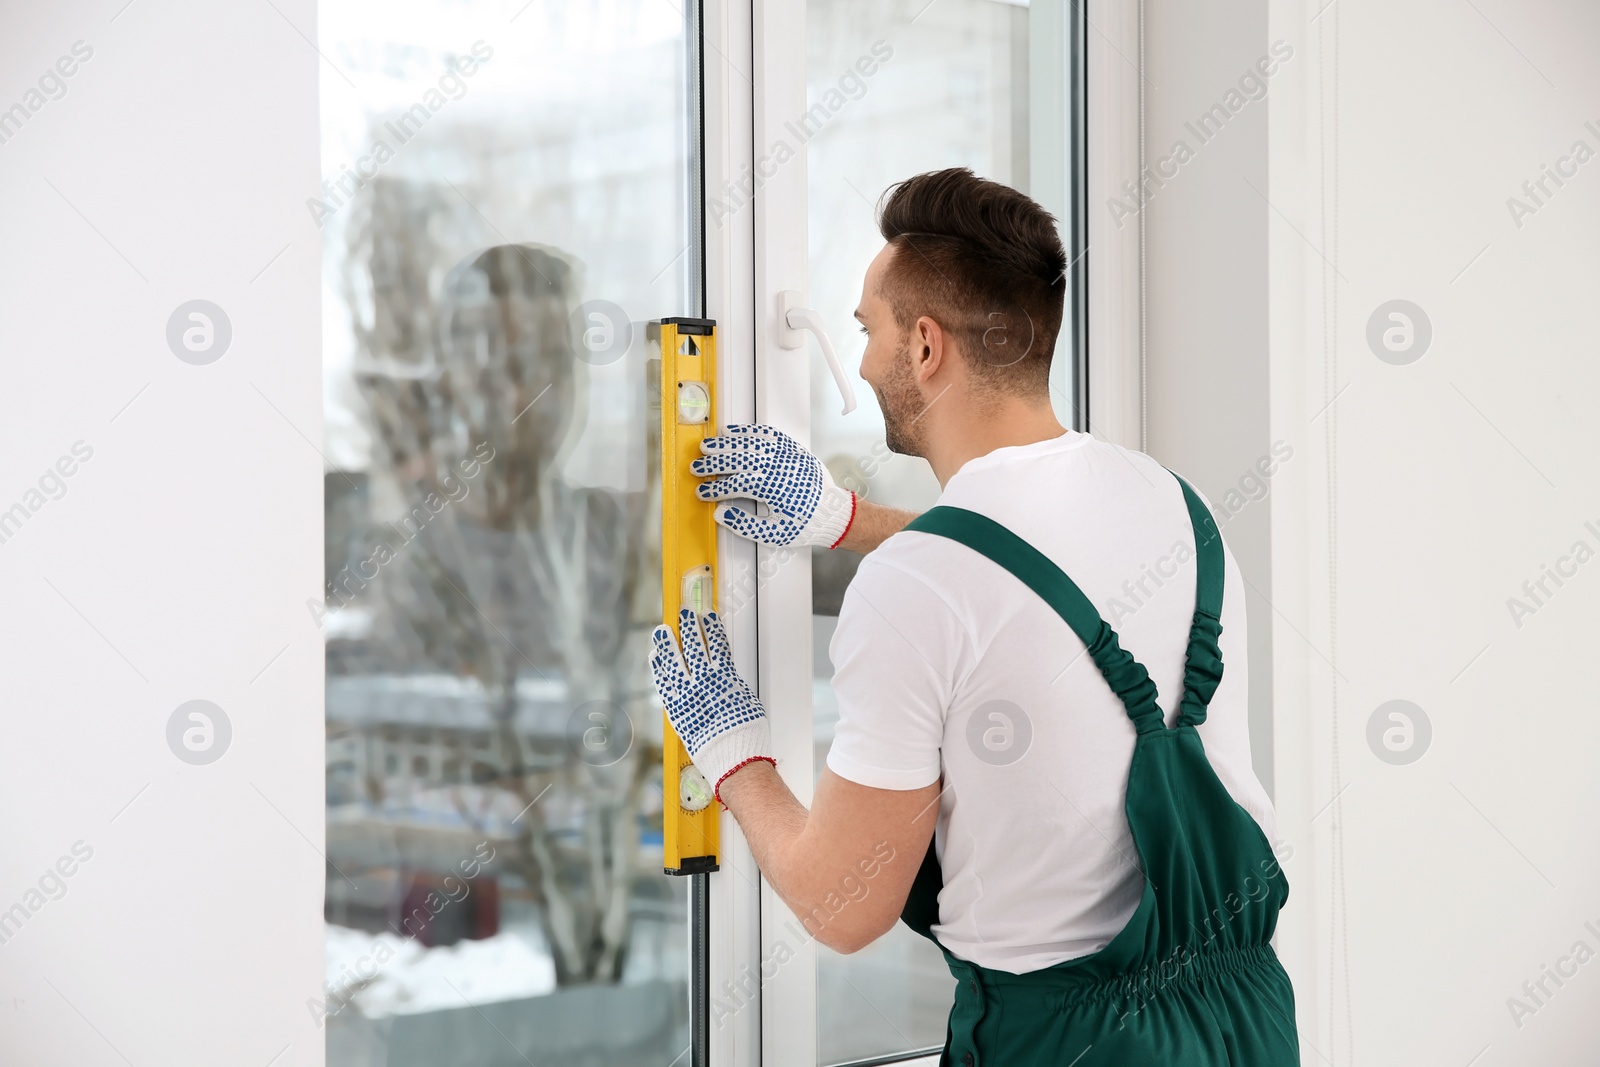 Photo of Construction worker using bubble level while installing window indoors